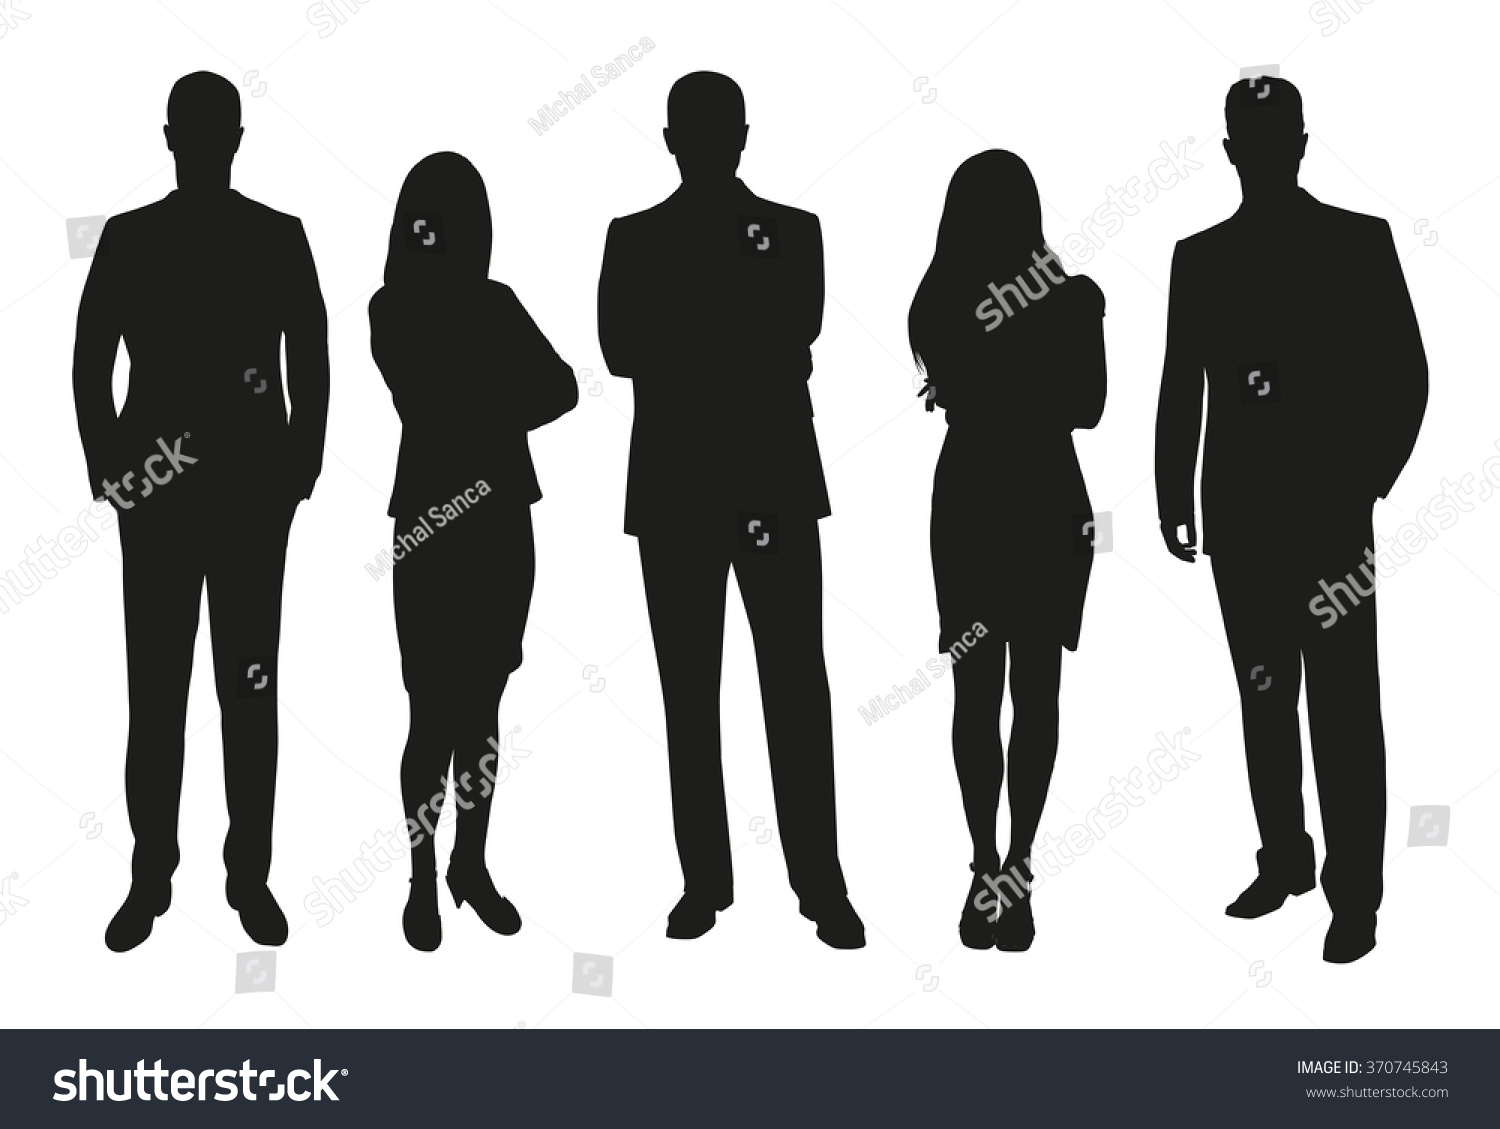 Business people, set of vector silhouettes #370745843